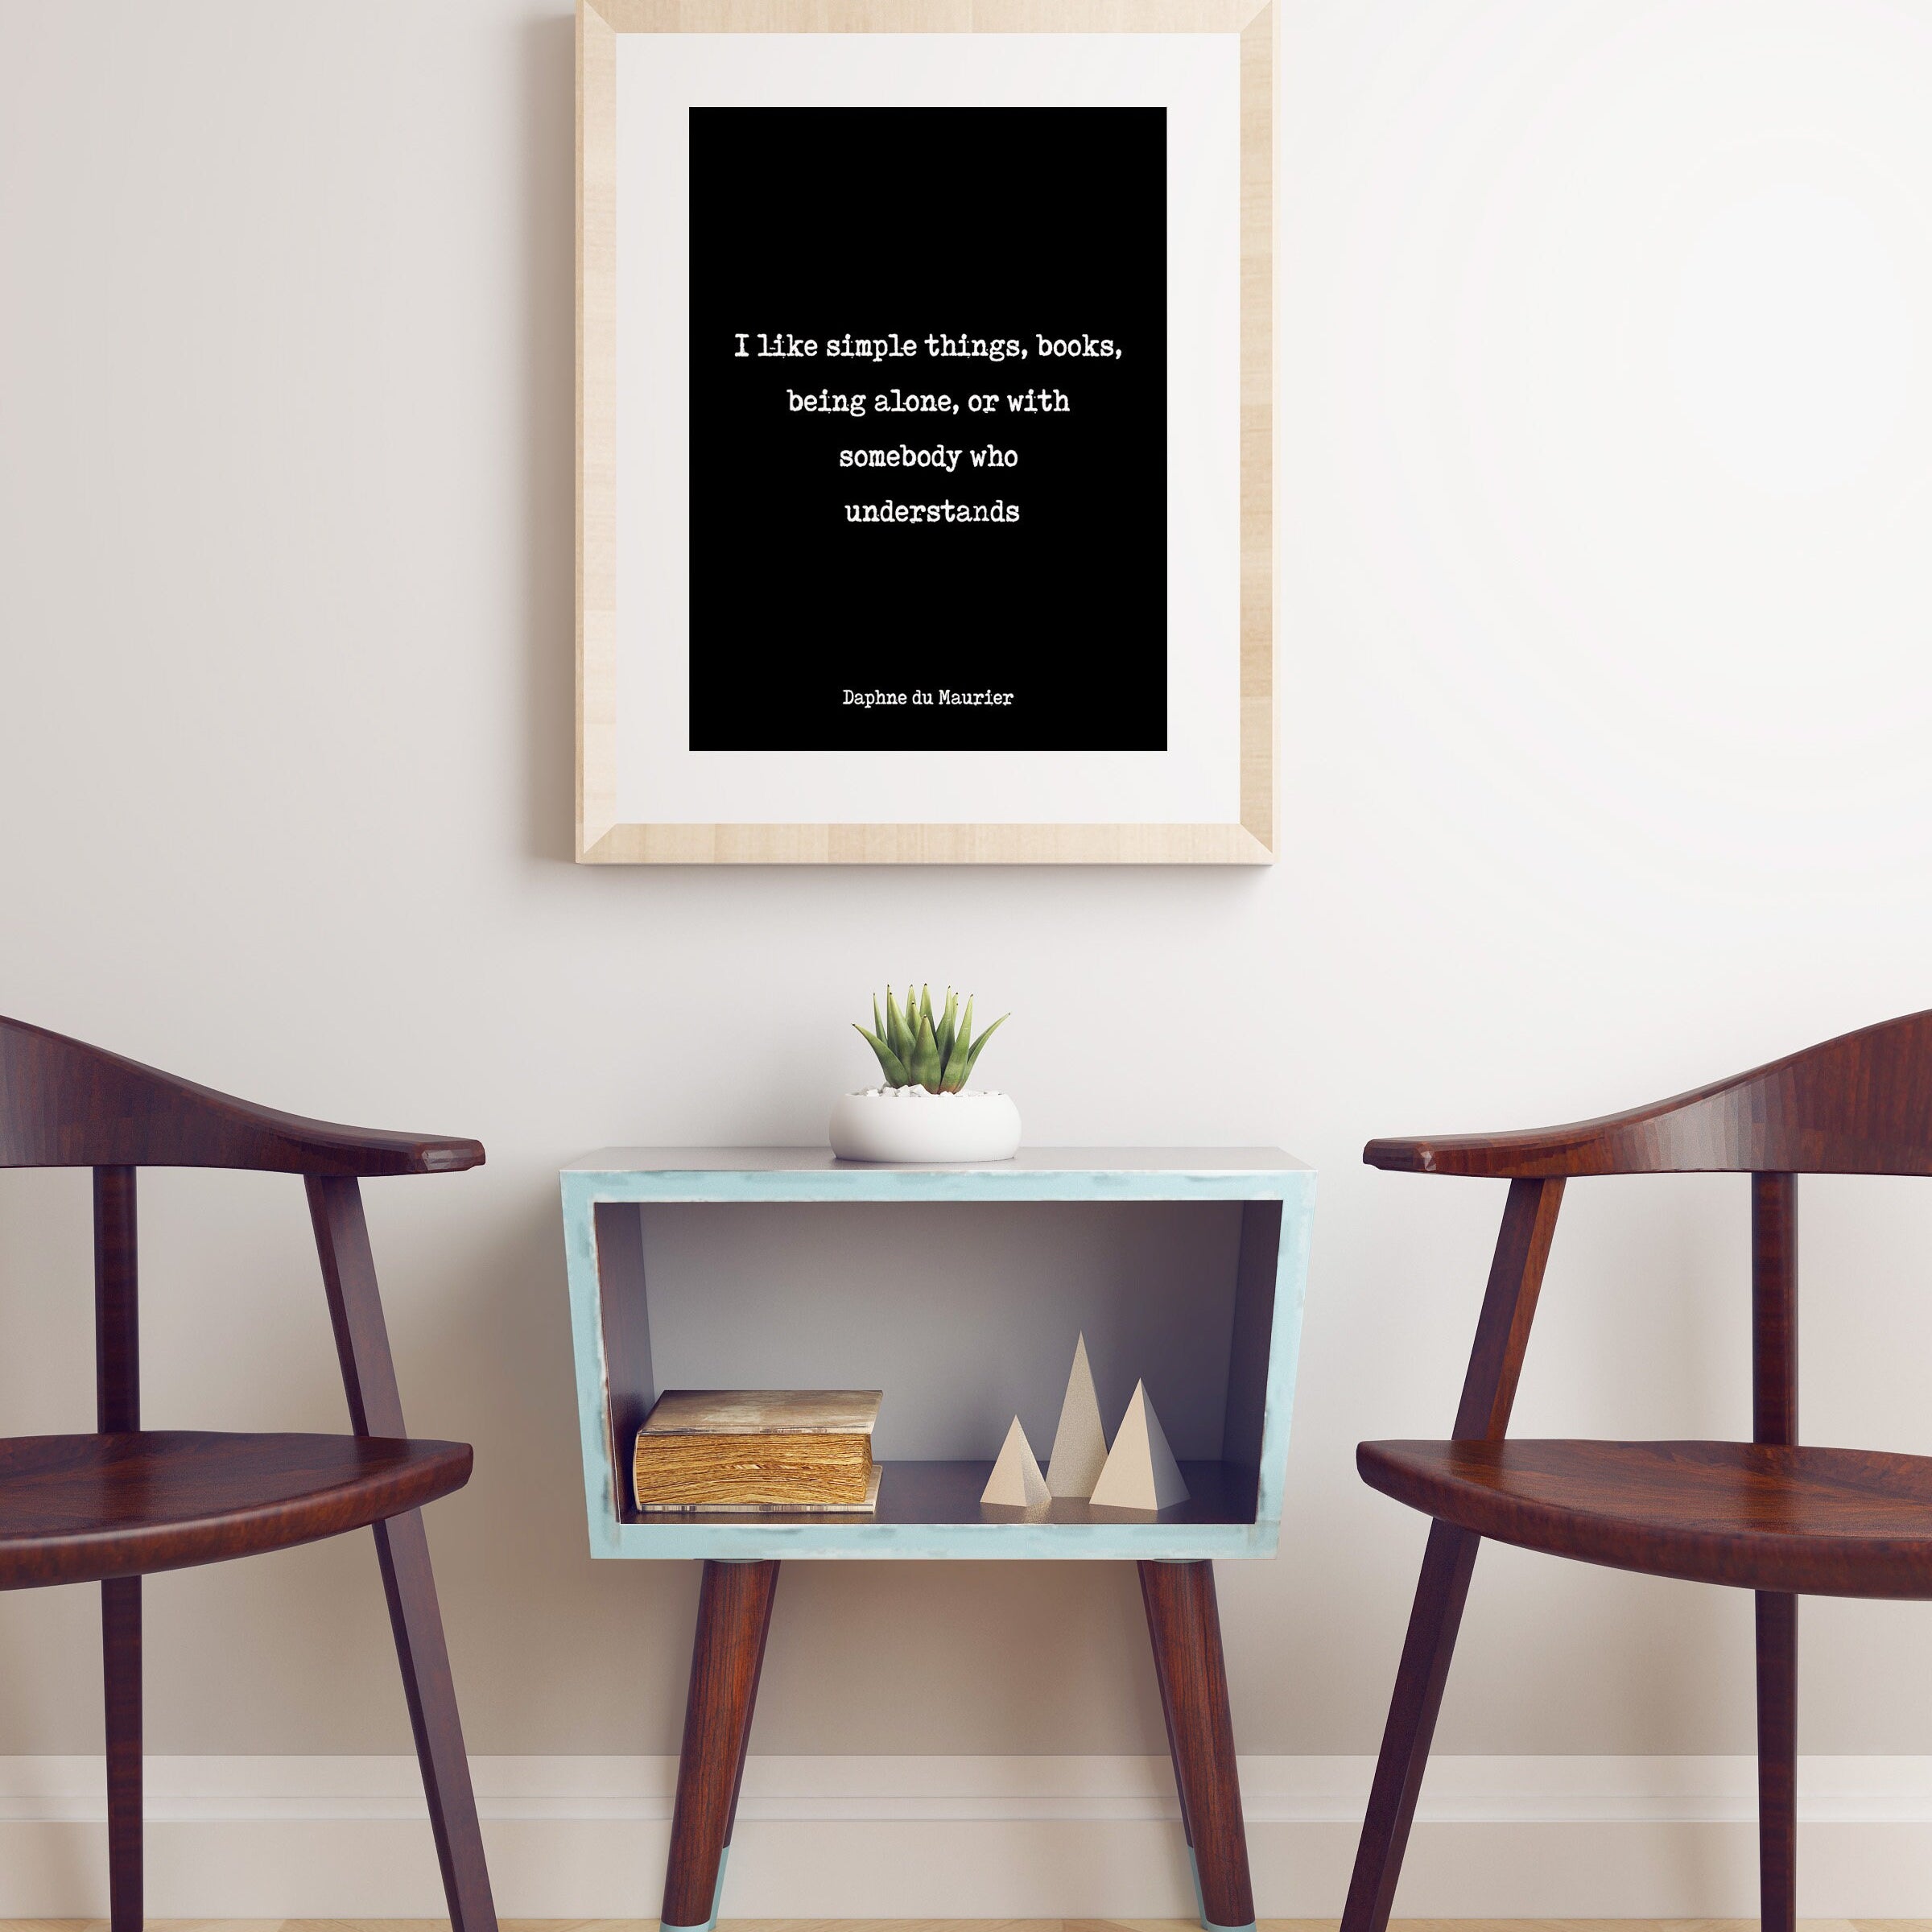 Daphne du Maurier Quote Print, I like simple things. Motivation Print Inspirational Poster